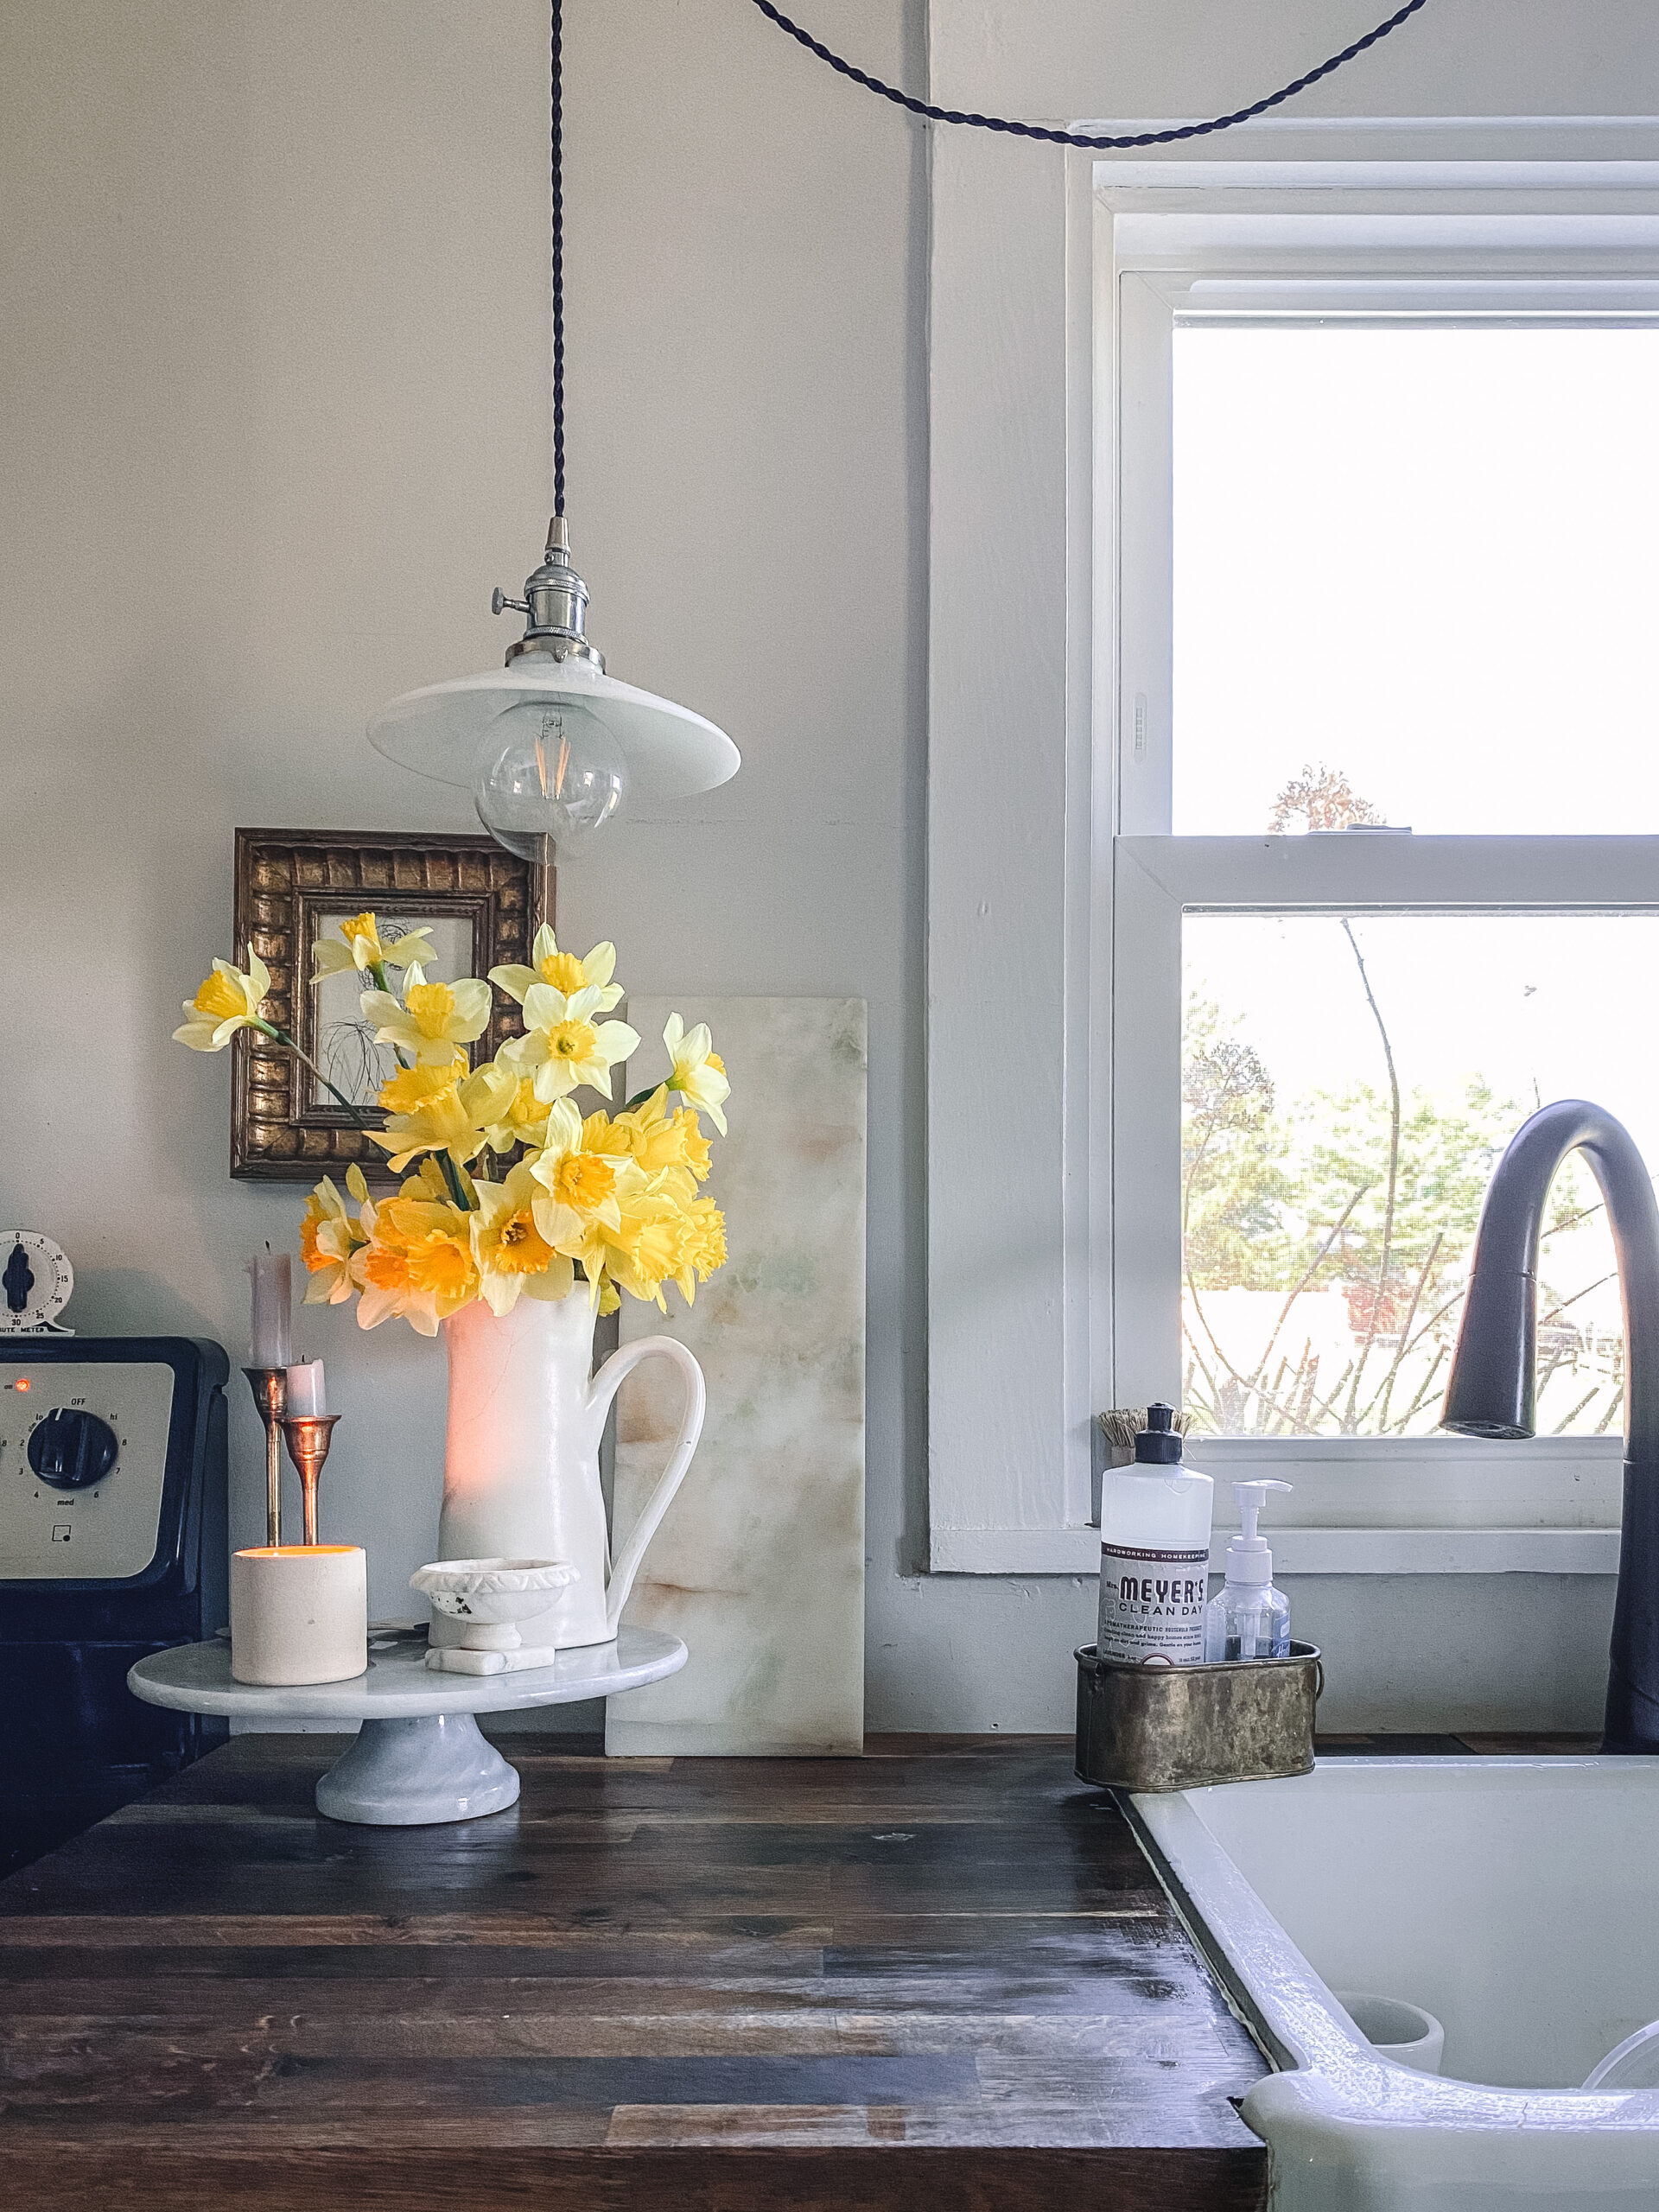 Daffodils in a pitcher on a rustic kitchen counter